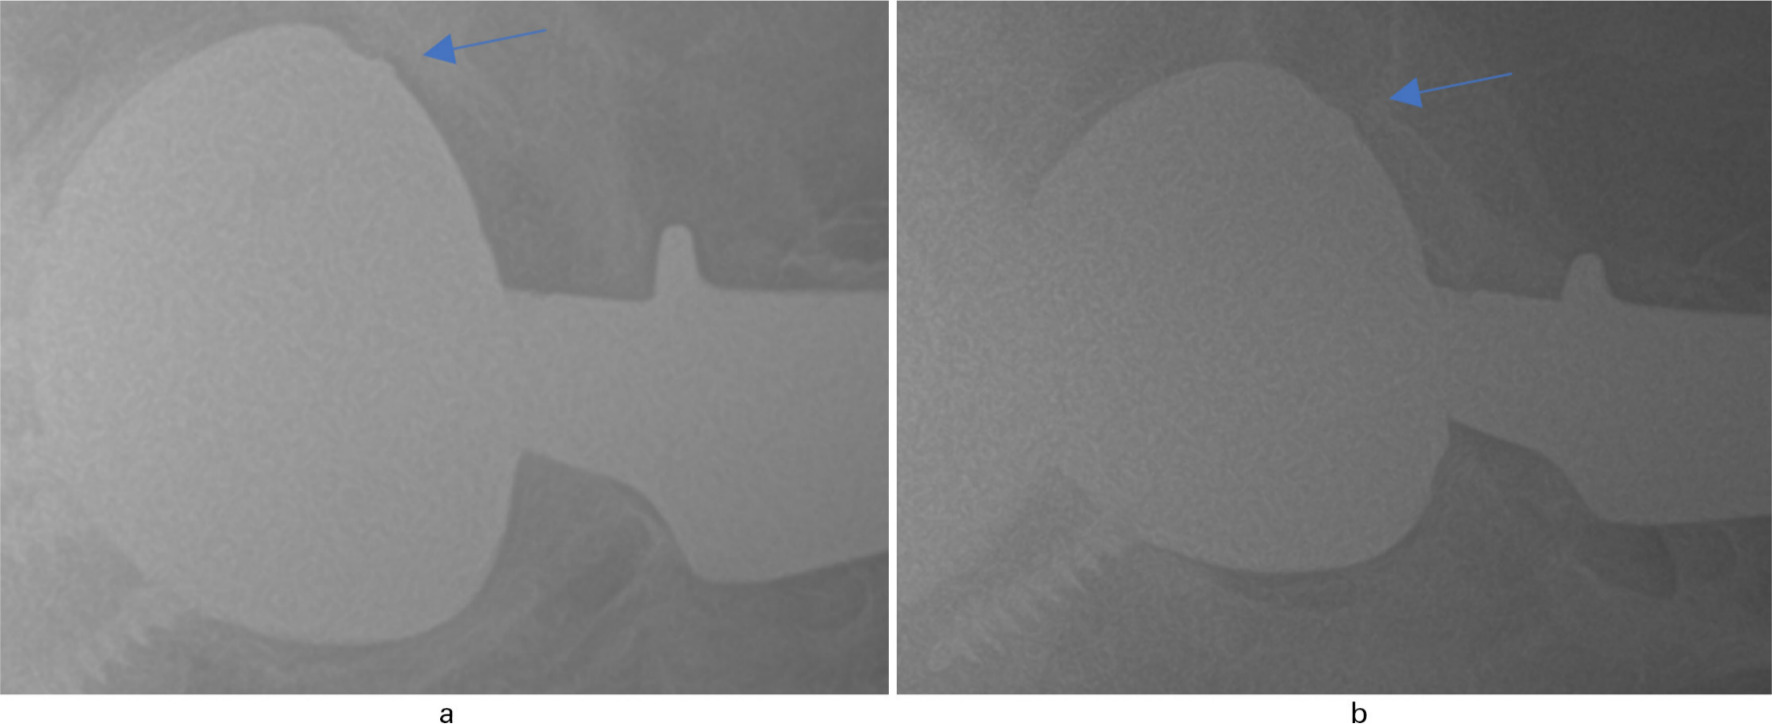 Fig. 3 
          Two radiographs taken on the same day of a Stryker Trident implant demonstrating how the same implant can look different on two separate radiographs taken on the same day; a) A Stryker Trident II implant demonstrating possible concern for malseating. b) The same Stryker Trident II implant from a radiograph taken on the same day demonstrating lower concern for malseating.
        